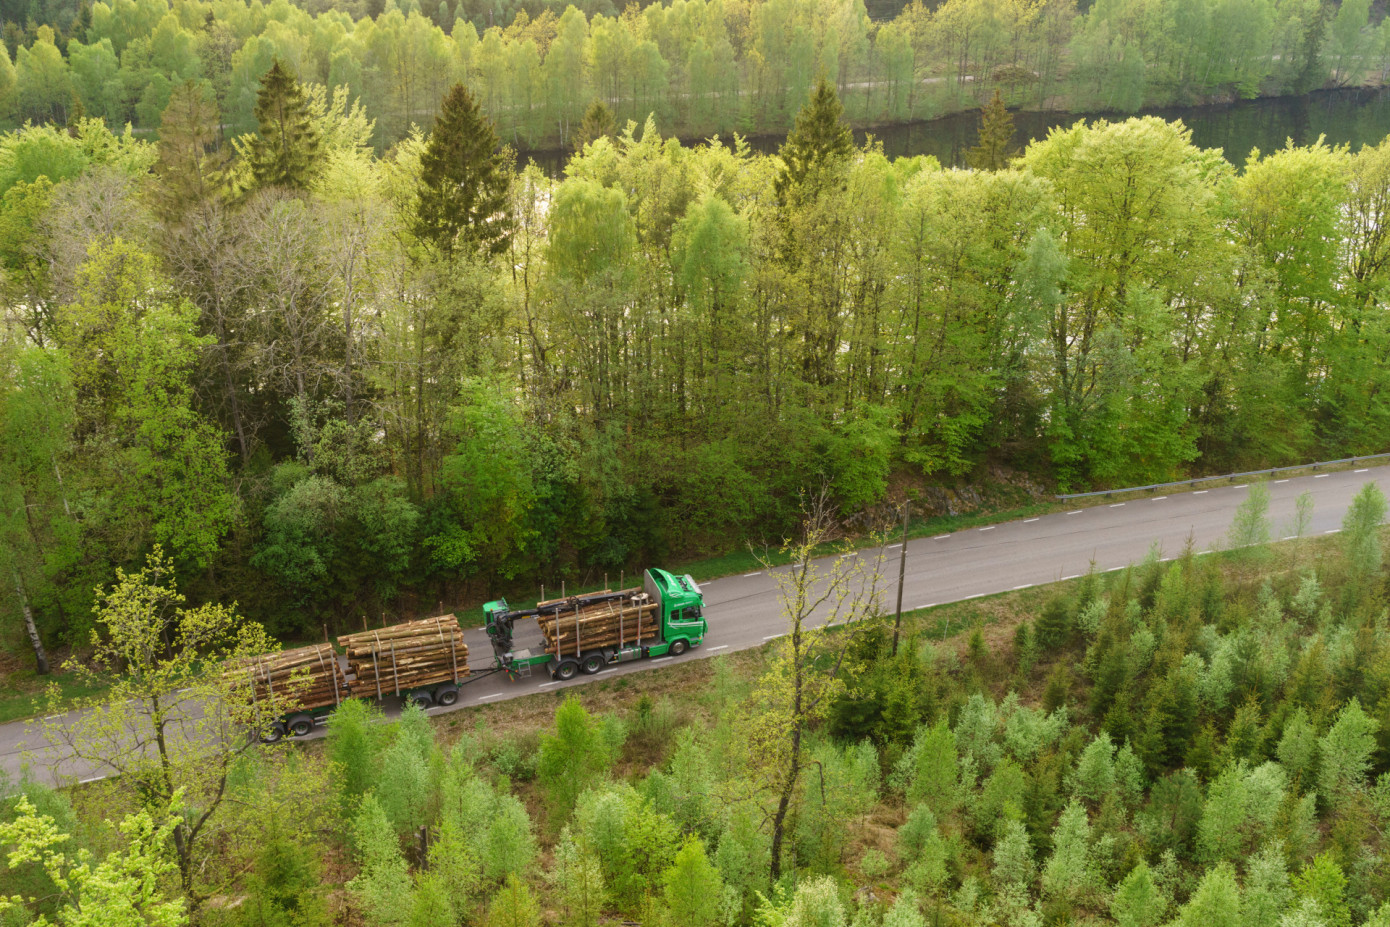 Södra announces price increases across timber and wood products